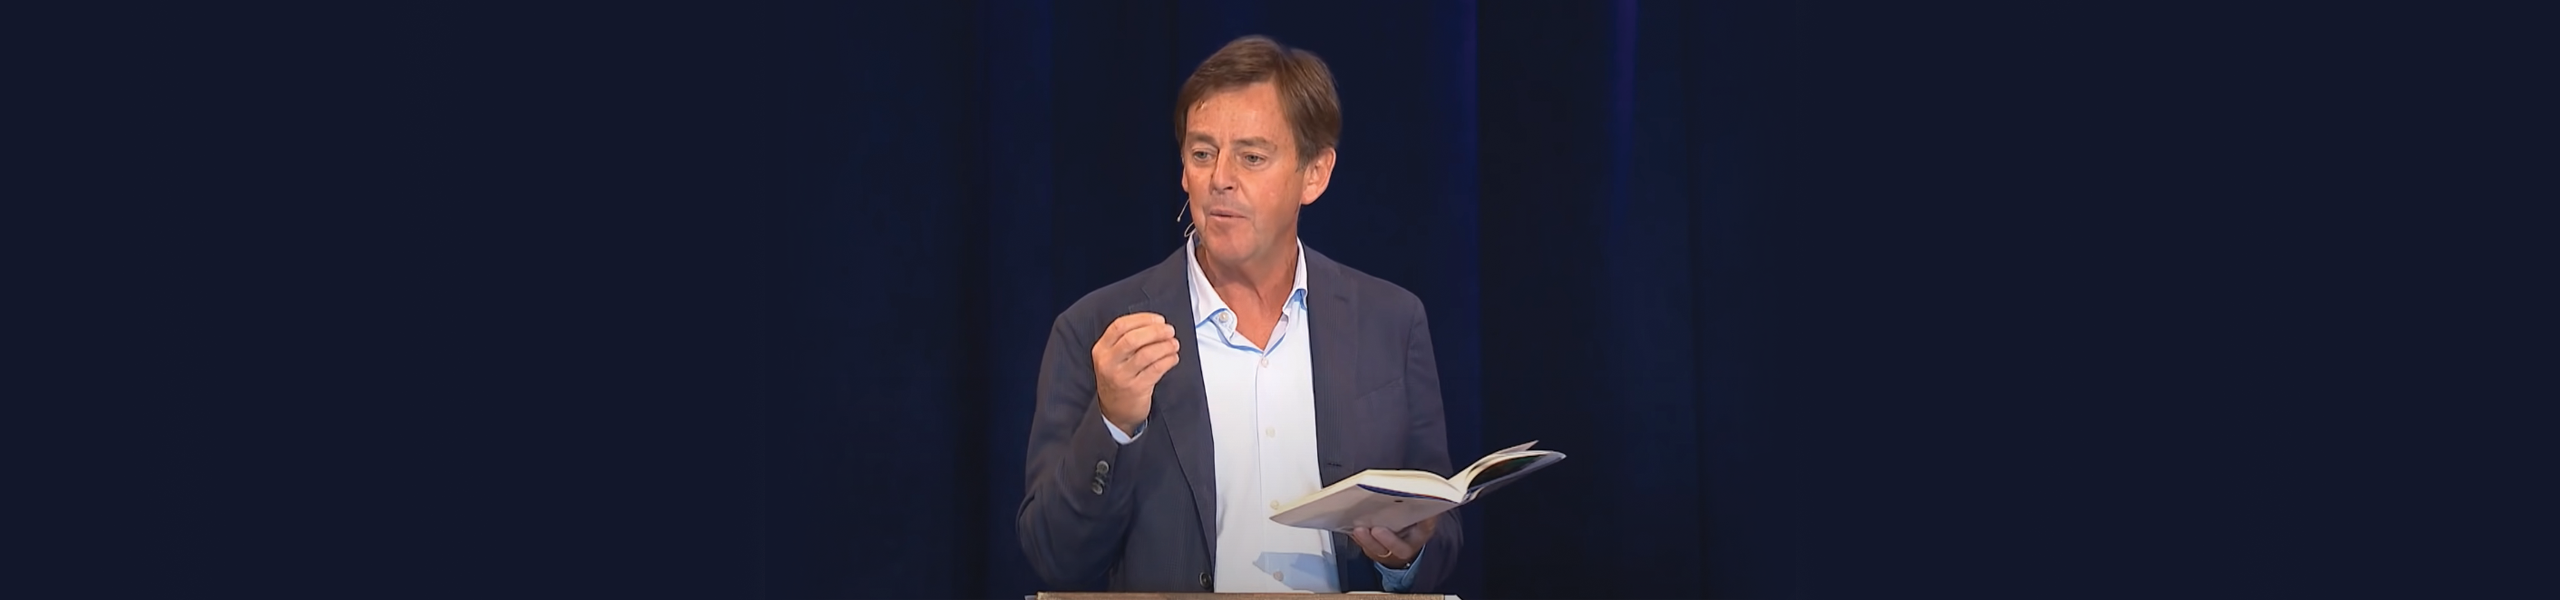 Basics 2015: A Conference for Pastors | Alistair Begg